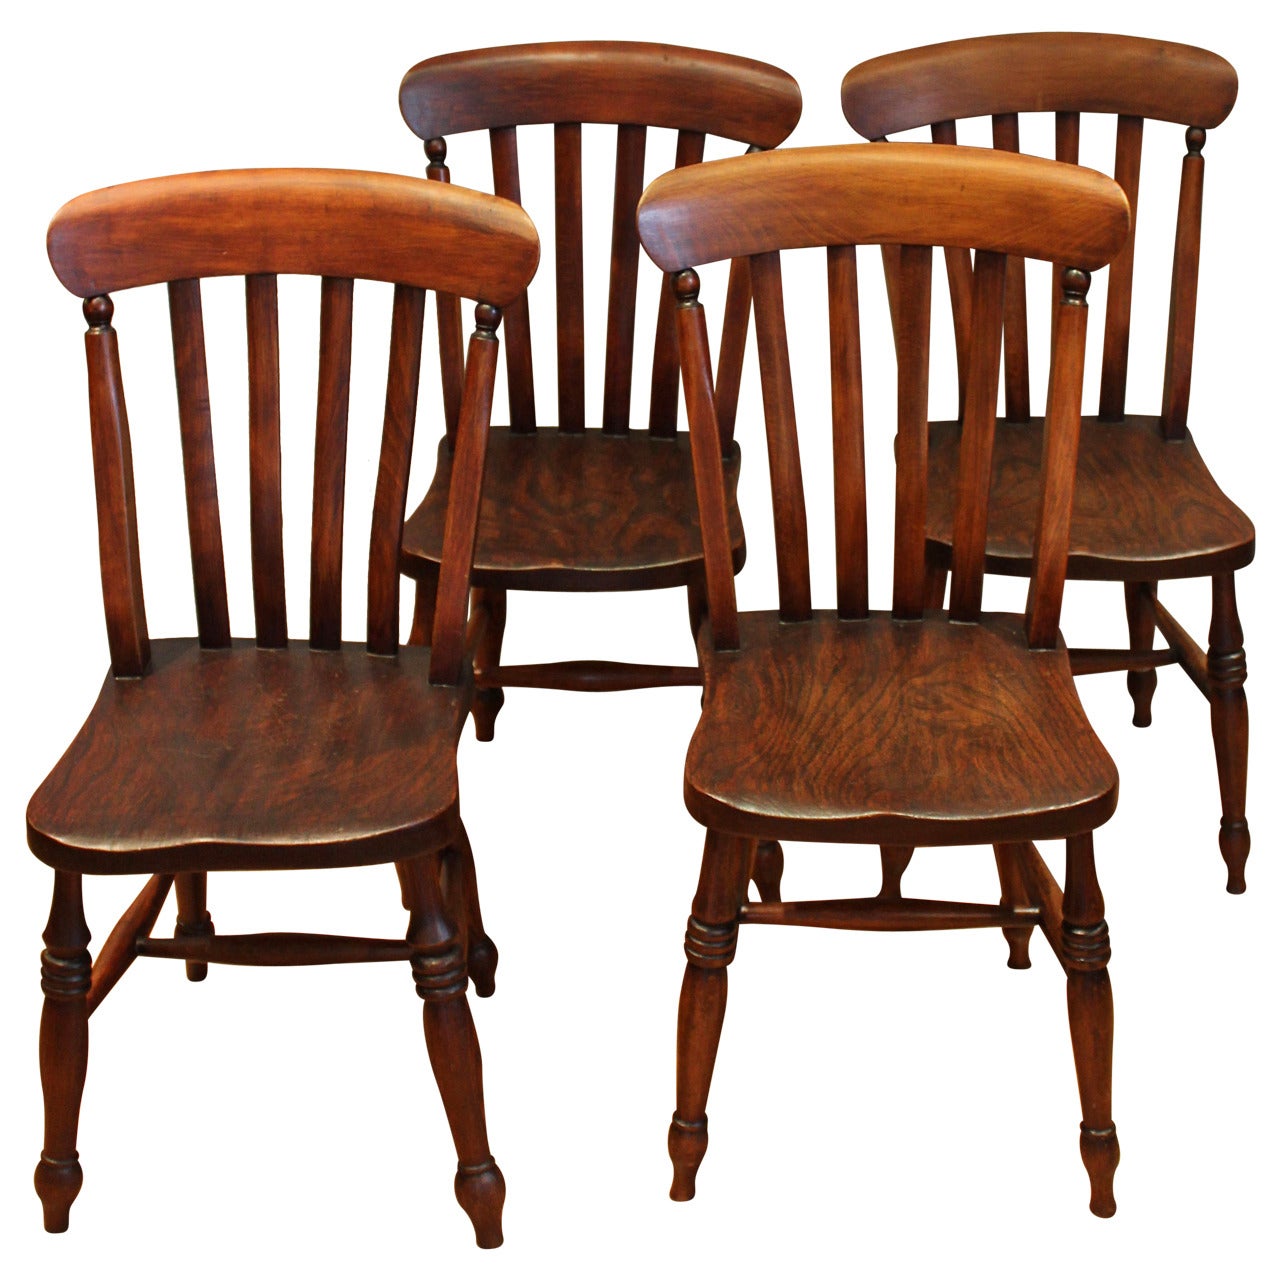 Set of Four Elm and Beech Lath Back Chairs